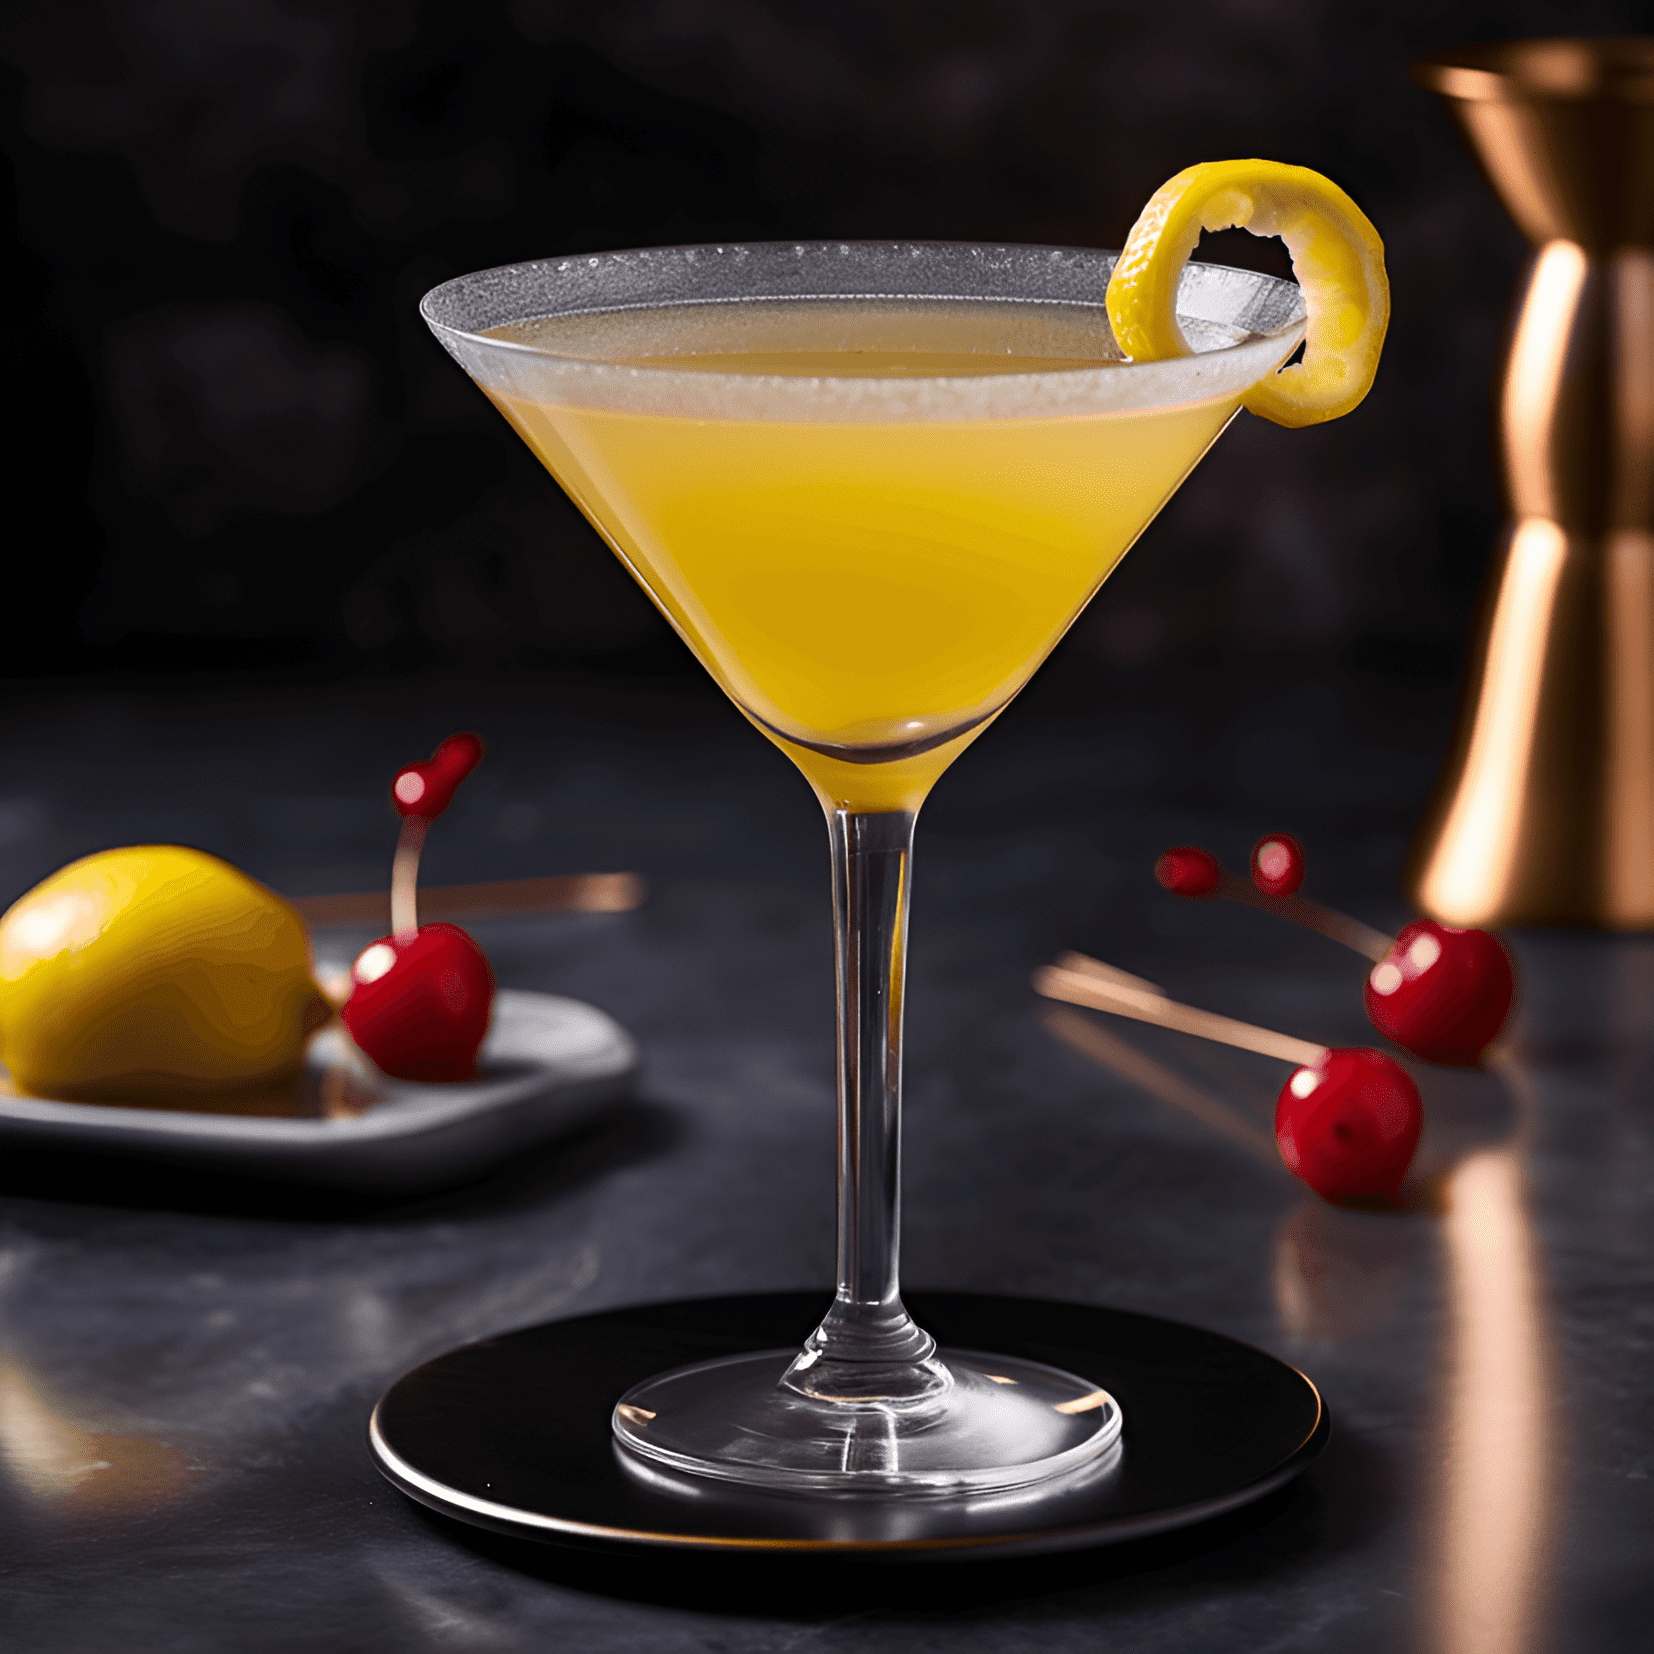 Golden Gate Cocktail Recipe | How to Make the perfect Golden Gate